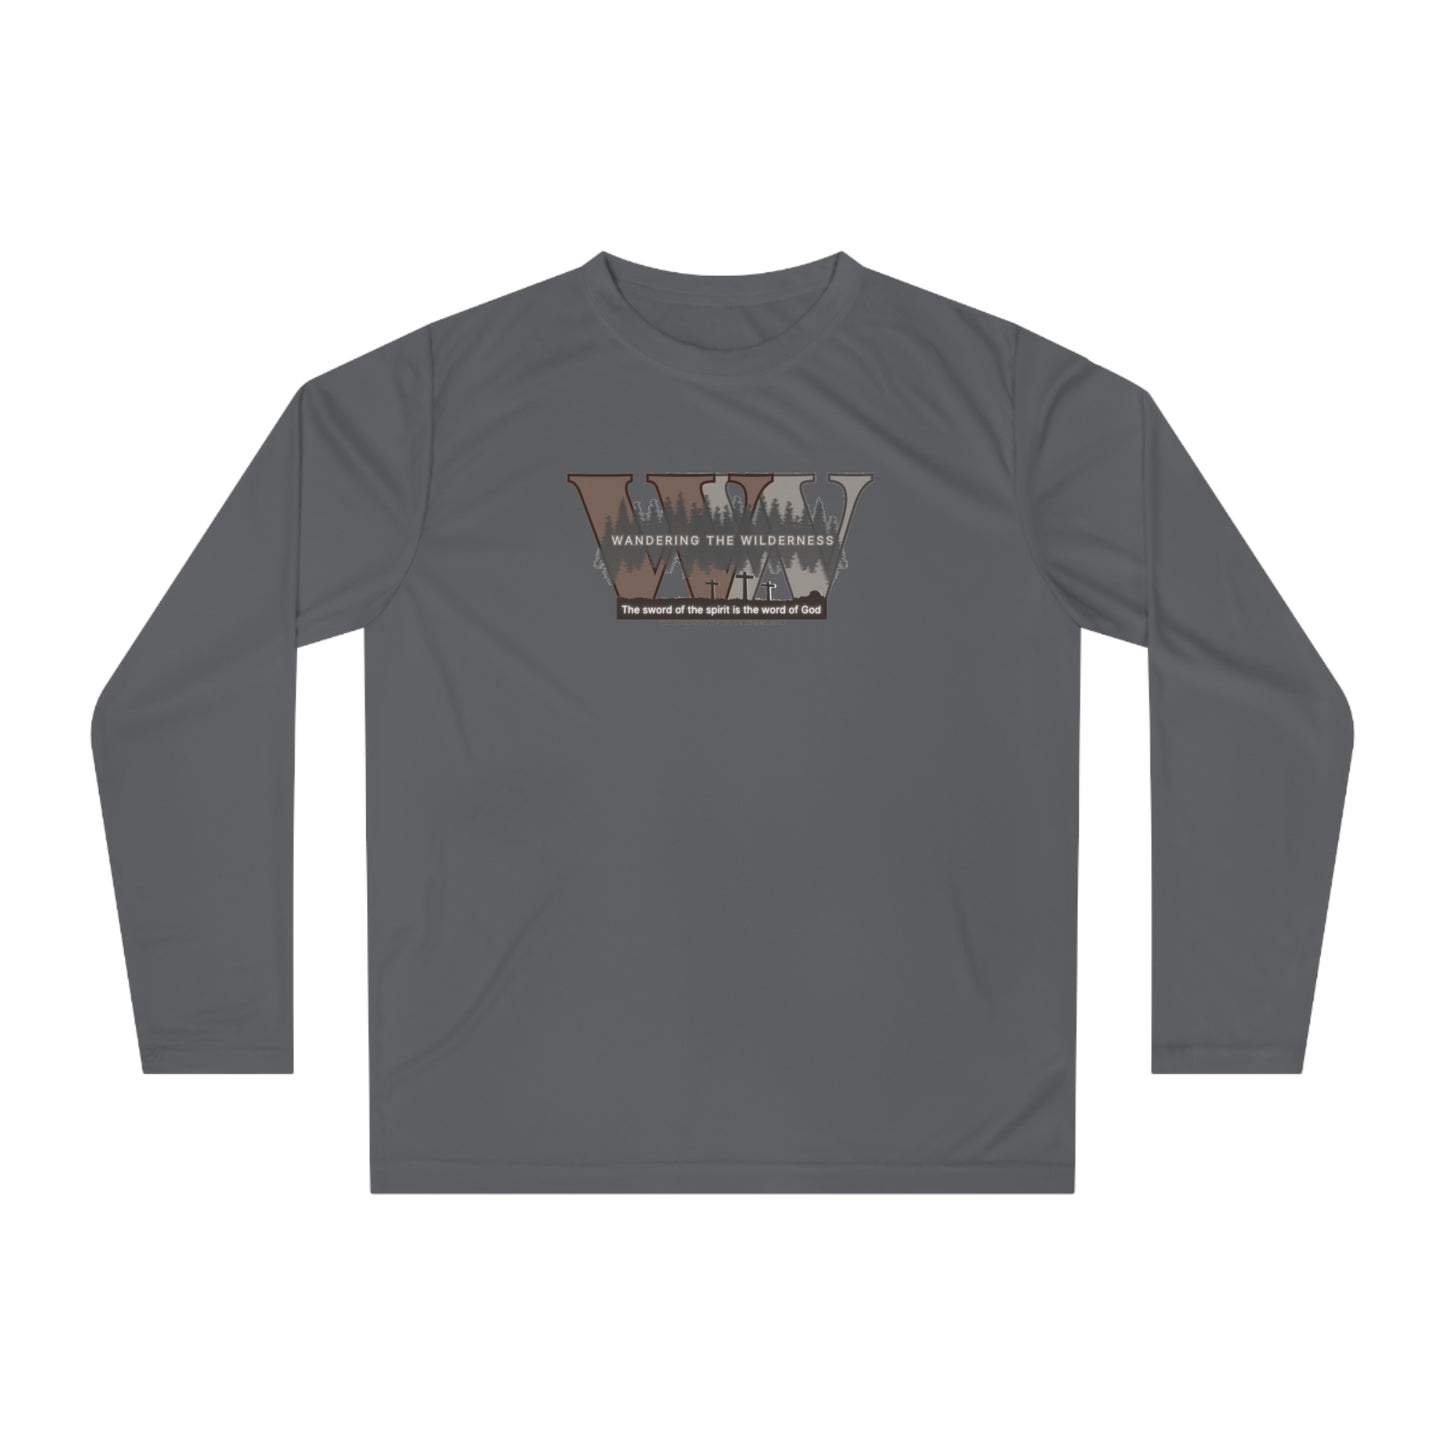 Wandering the Wilderness Performance Long Sleeve Shirt big logo on front.